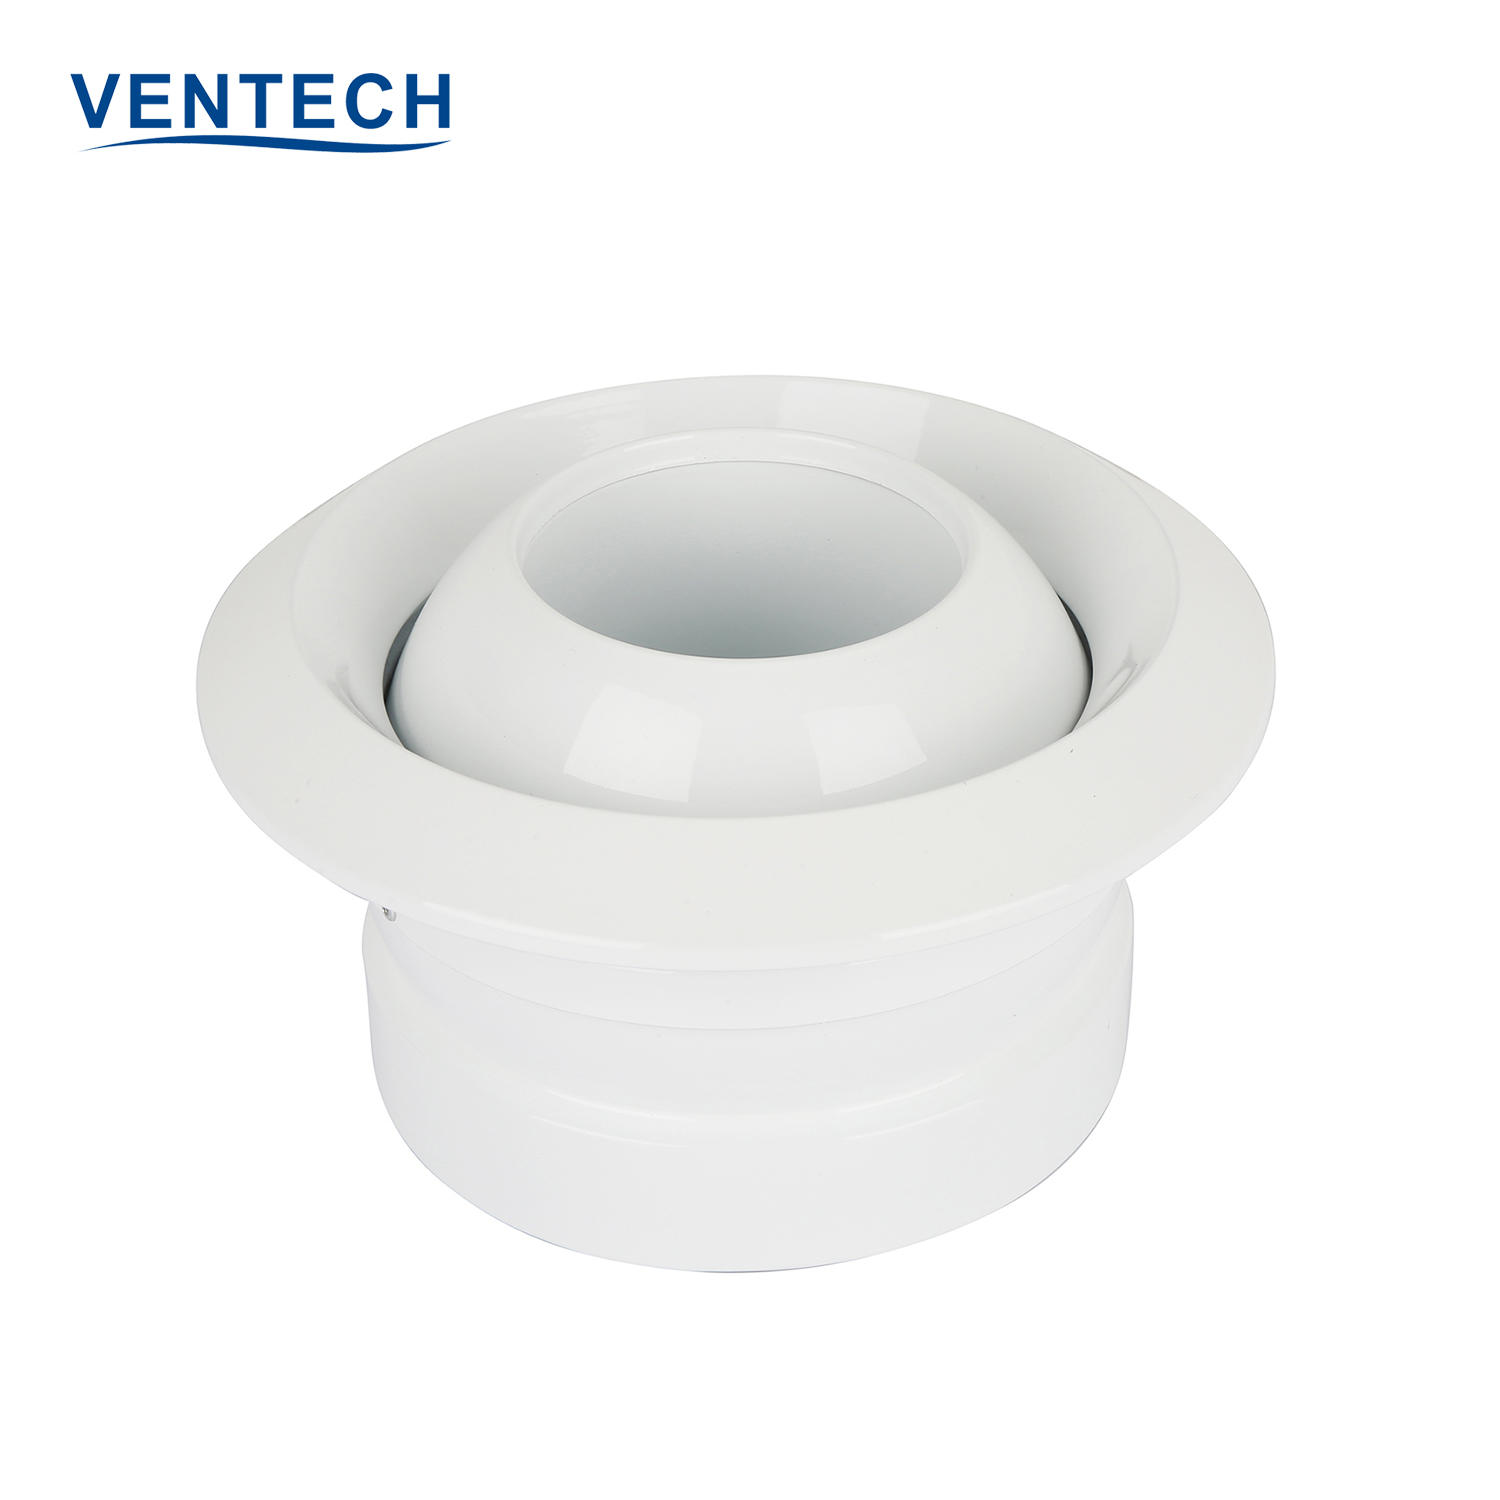 Hvac Ventilation Aluminium Supply Air Duct Conditioning Ceiling Round Eyeball Spout Ball Jet Nozzle Air Diffusers